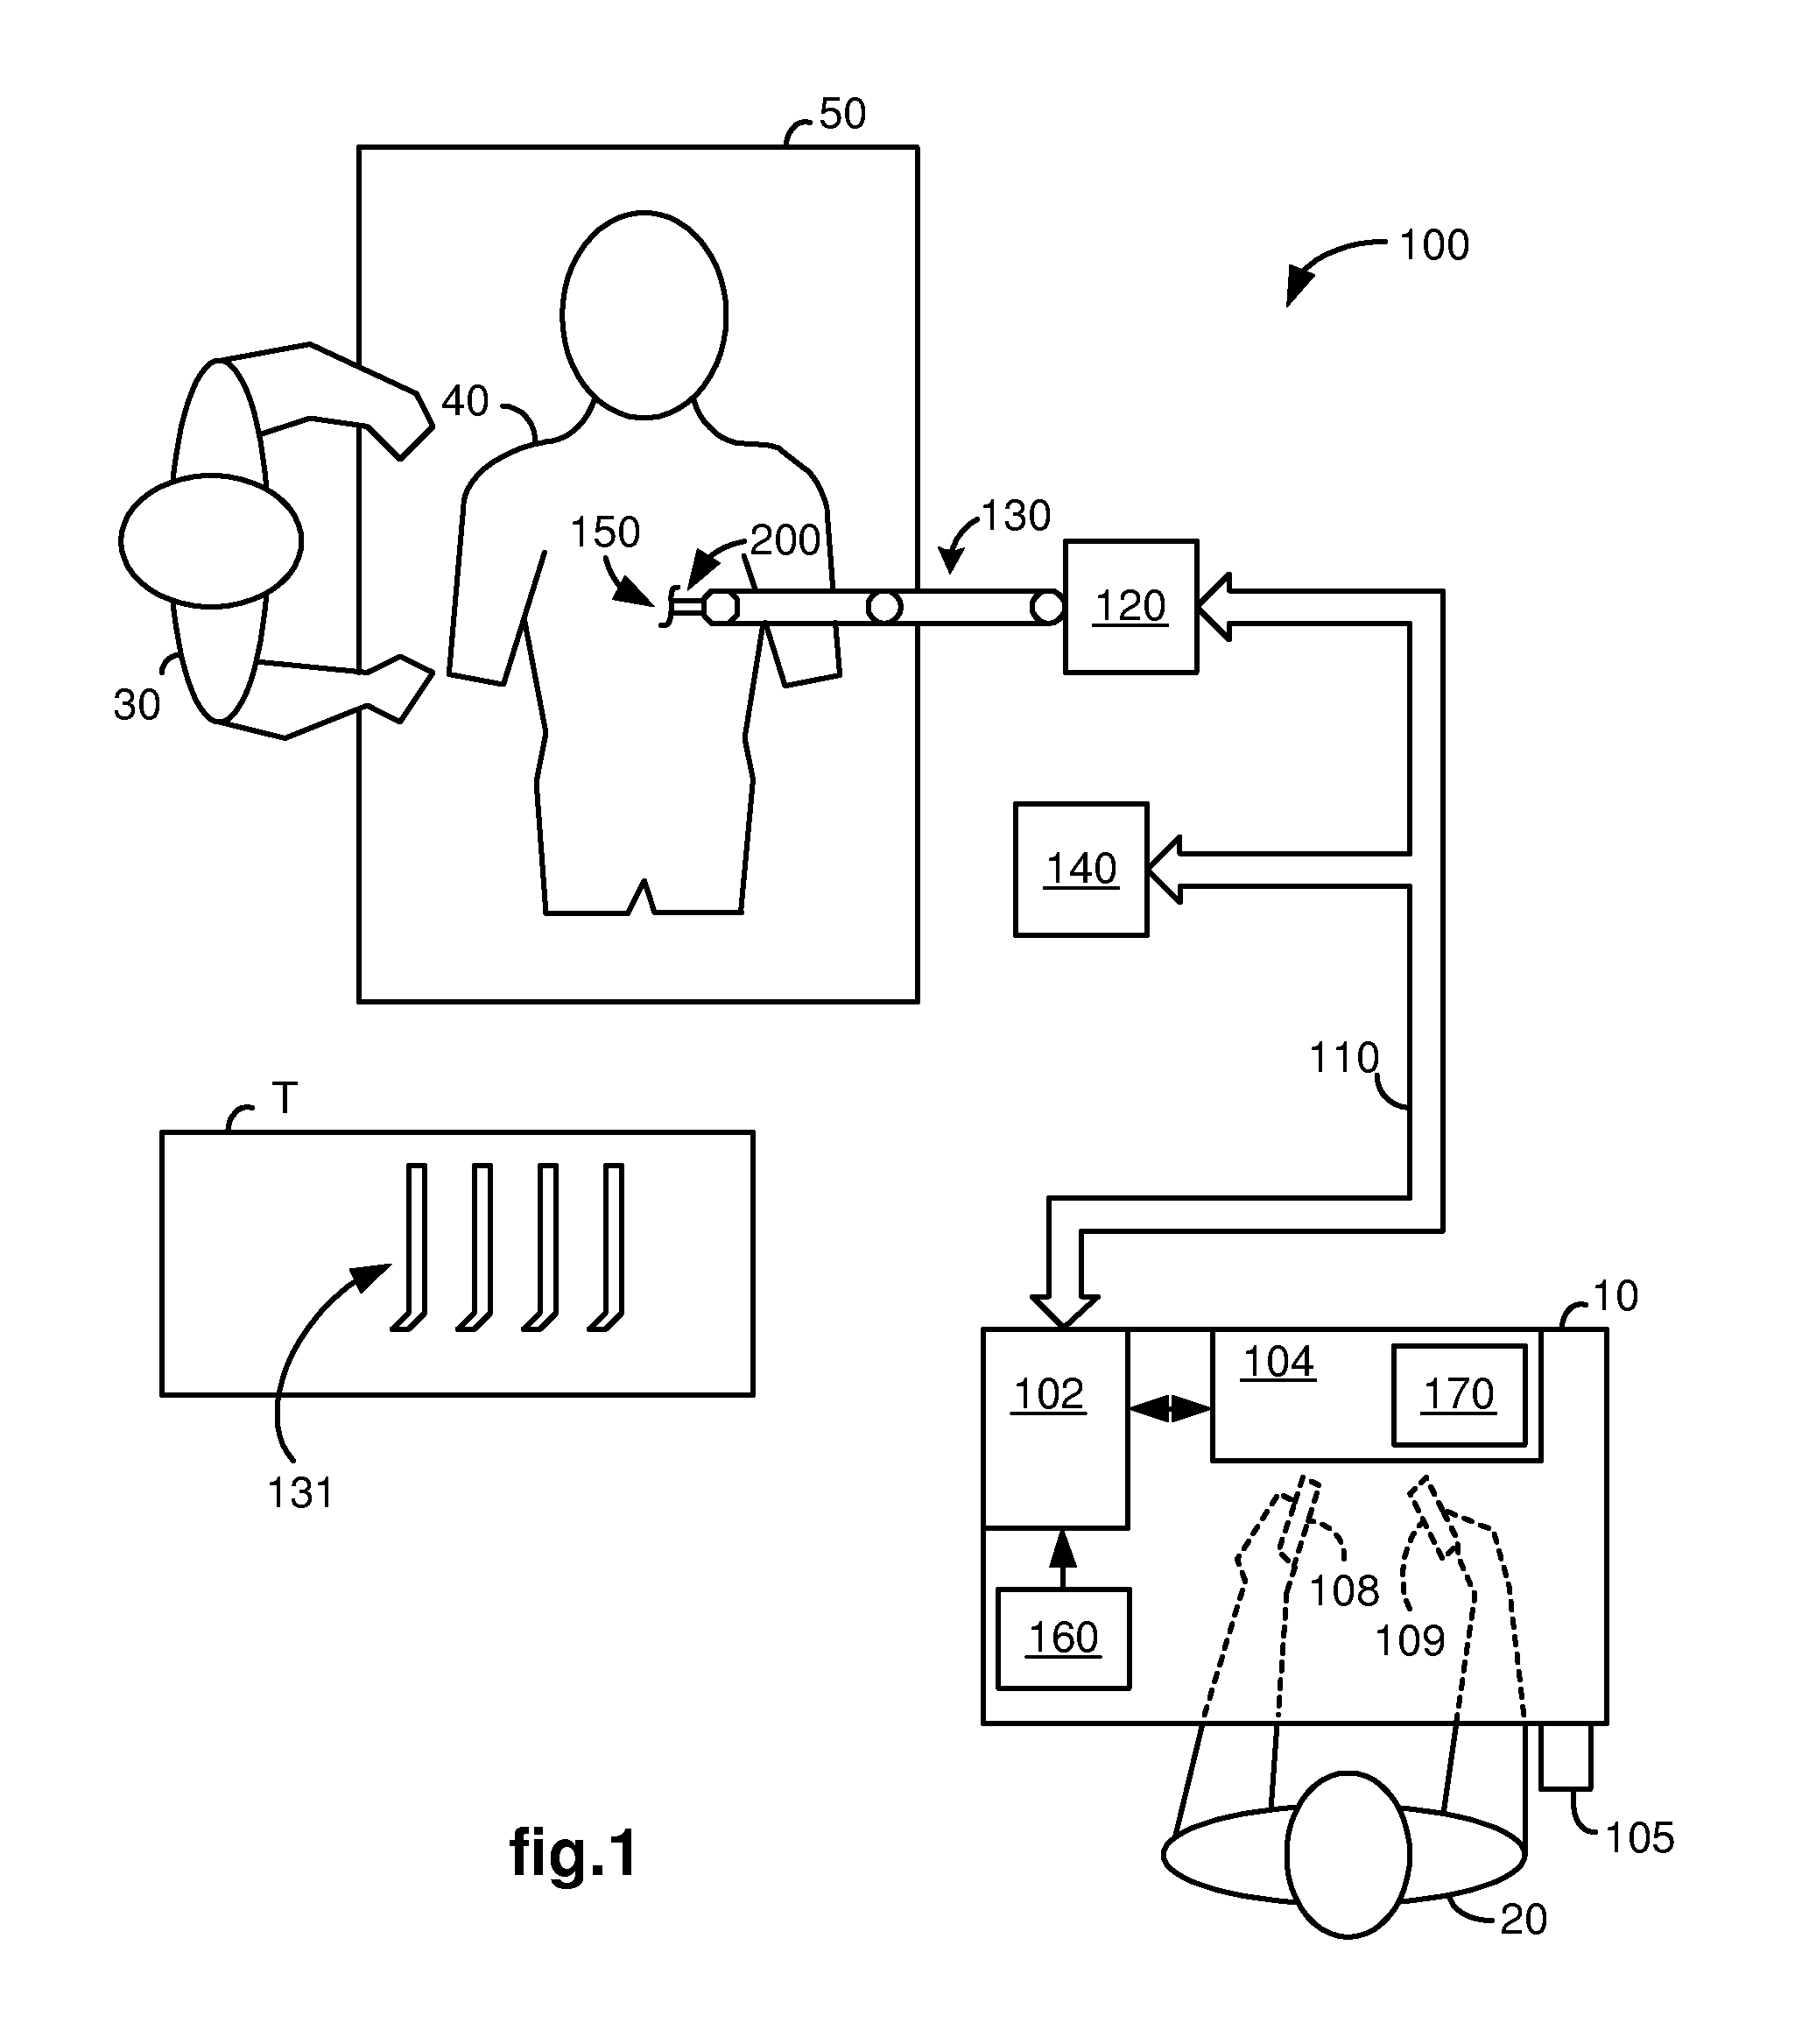 Controller assisted reconfiguration of an articulated instrument during movement into and out of an entry guide